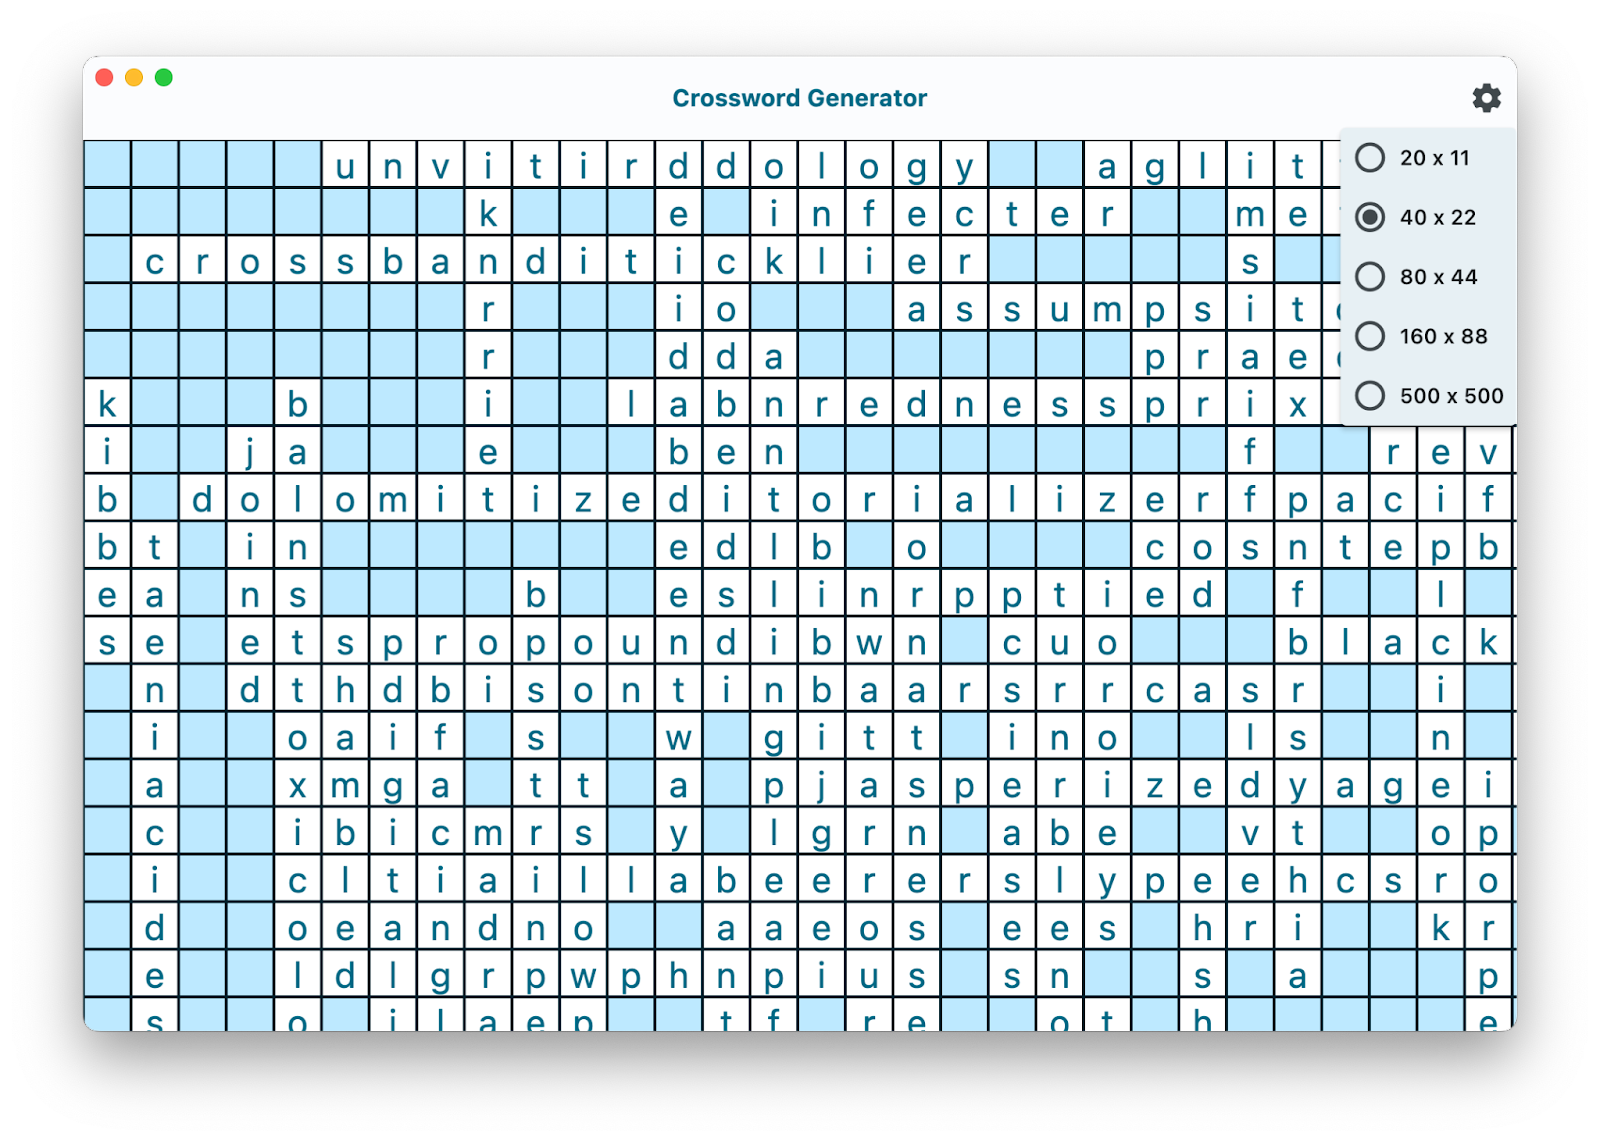 An app window with the title Crossword Generator and a grid of characters laid out as overlapping words with no rhyme or reason